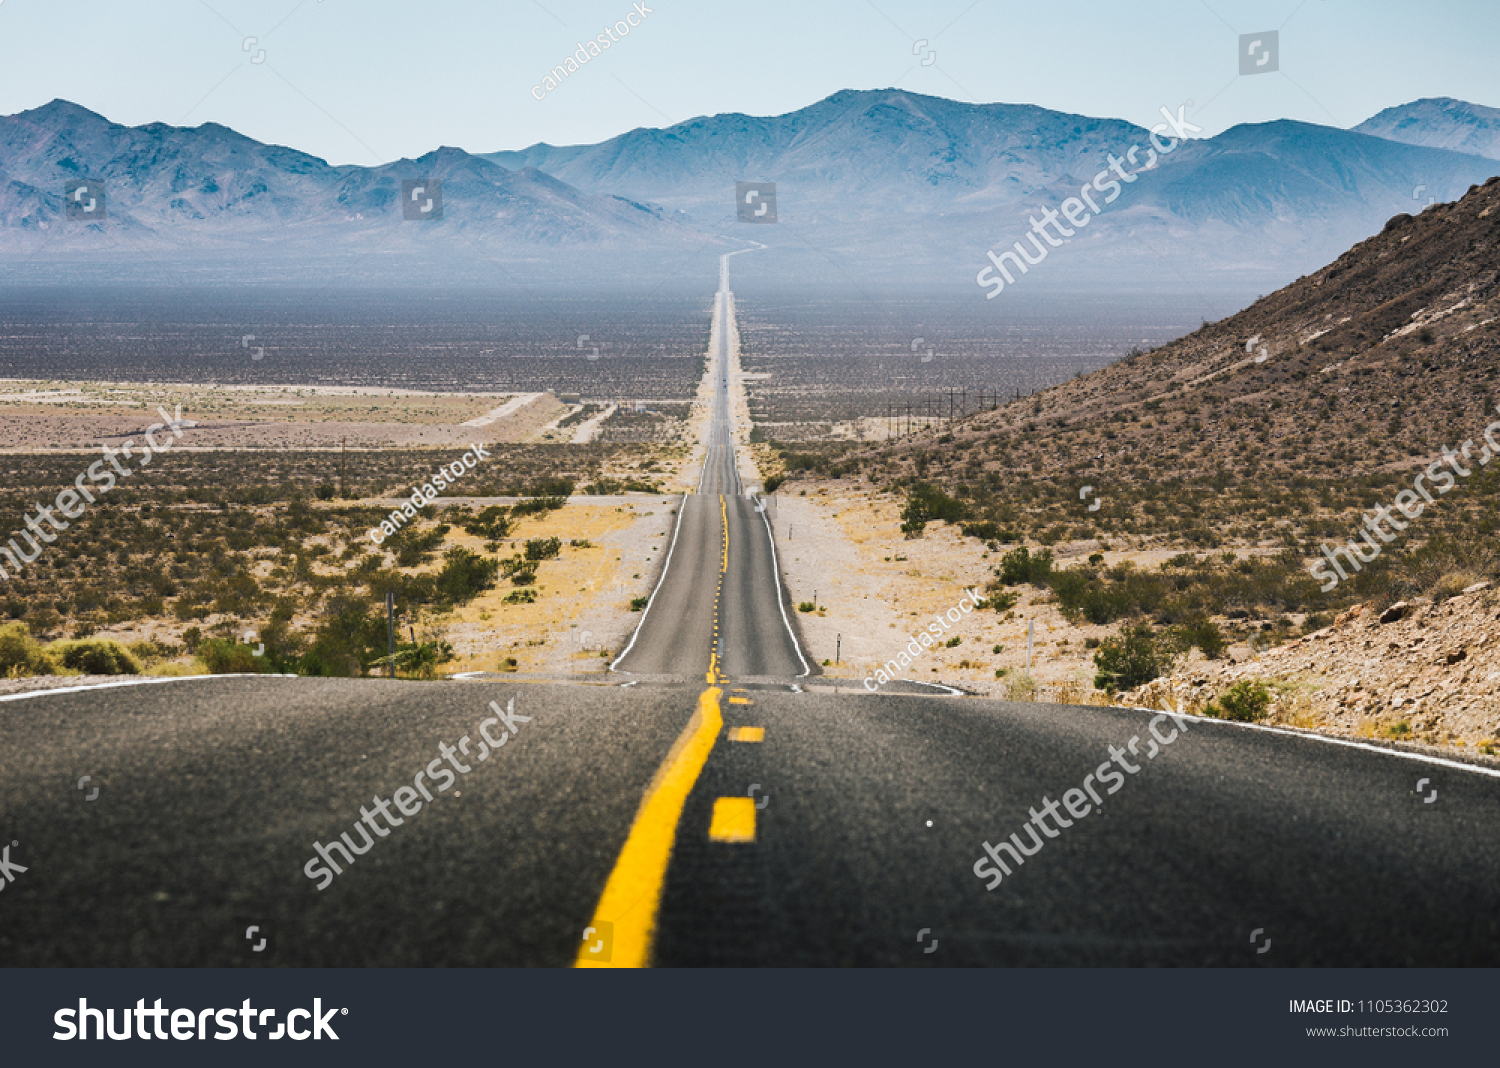 Classic panorama view of an empty long highway road in the American West on a beautiful sunny day in summer, USA, North America #1105362302